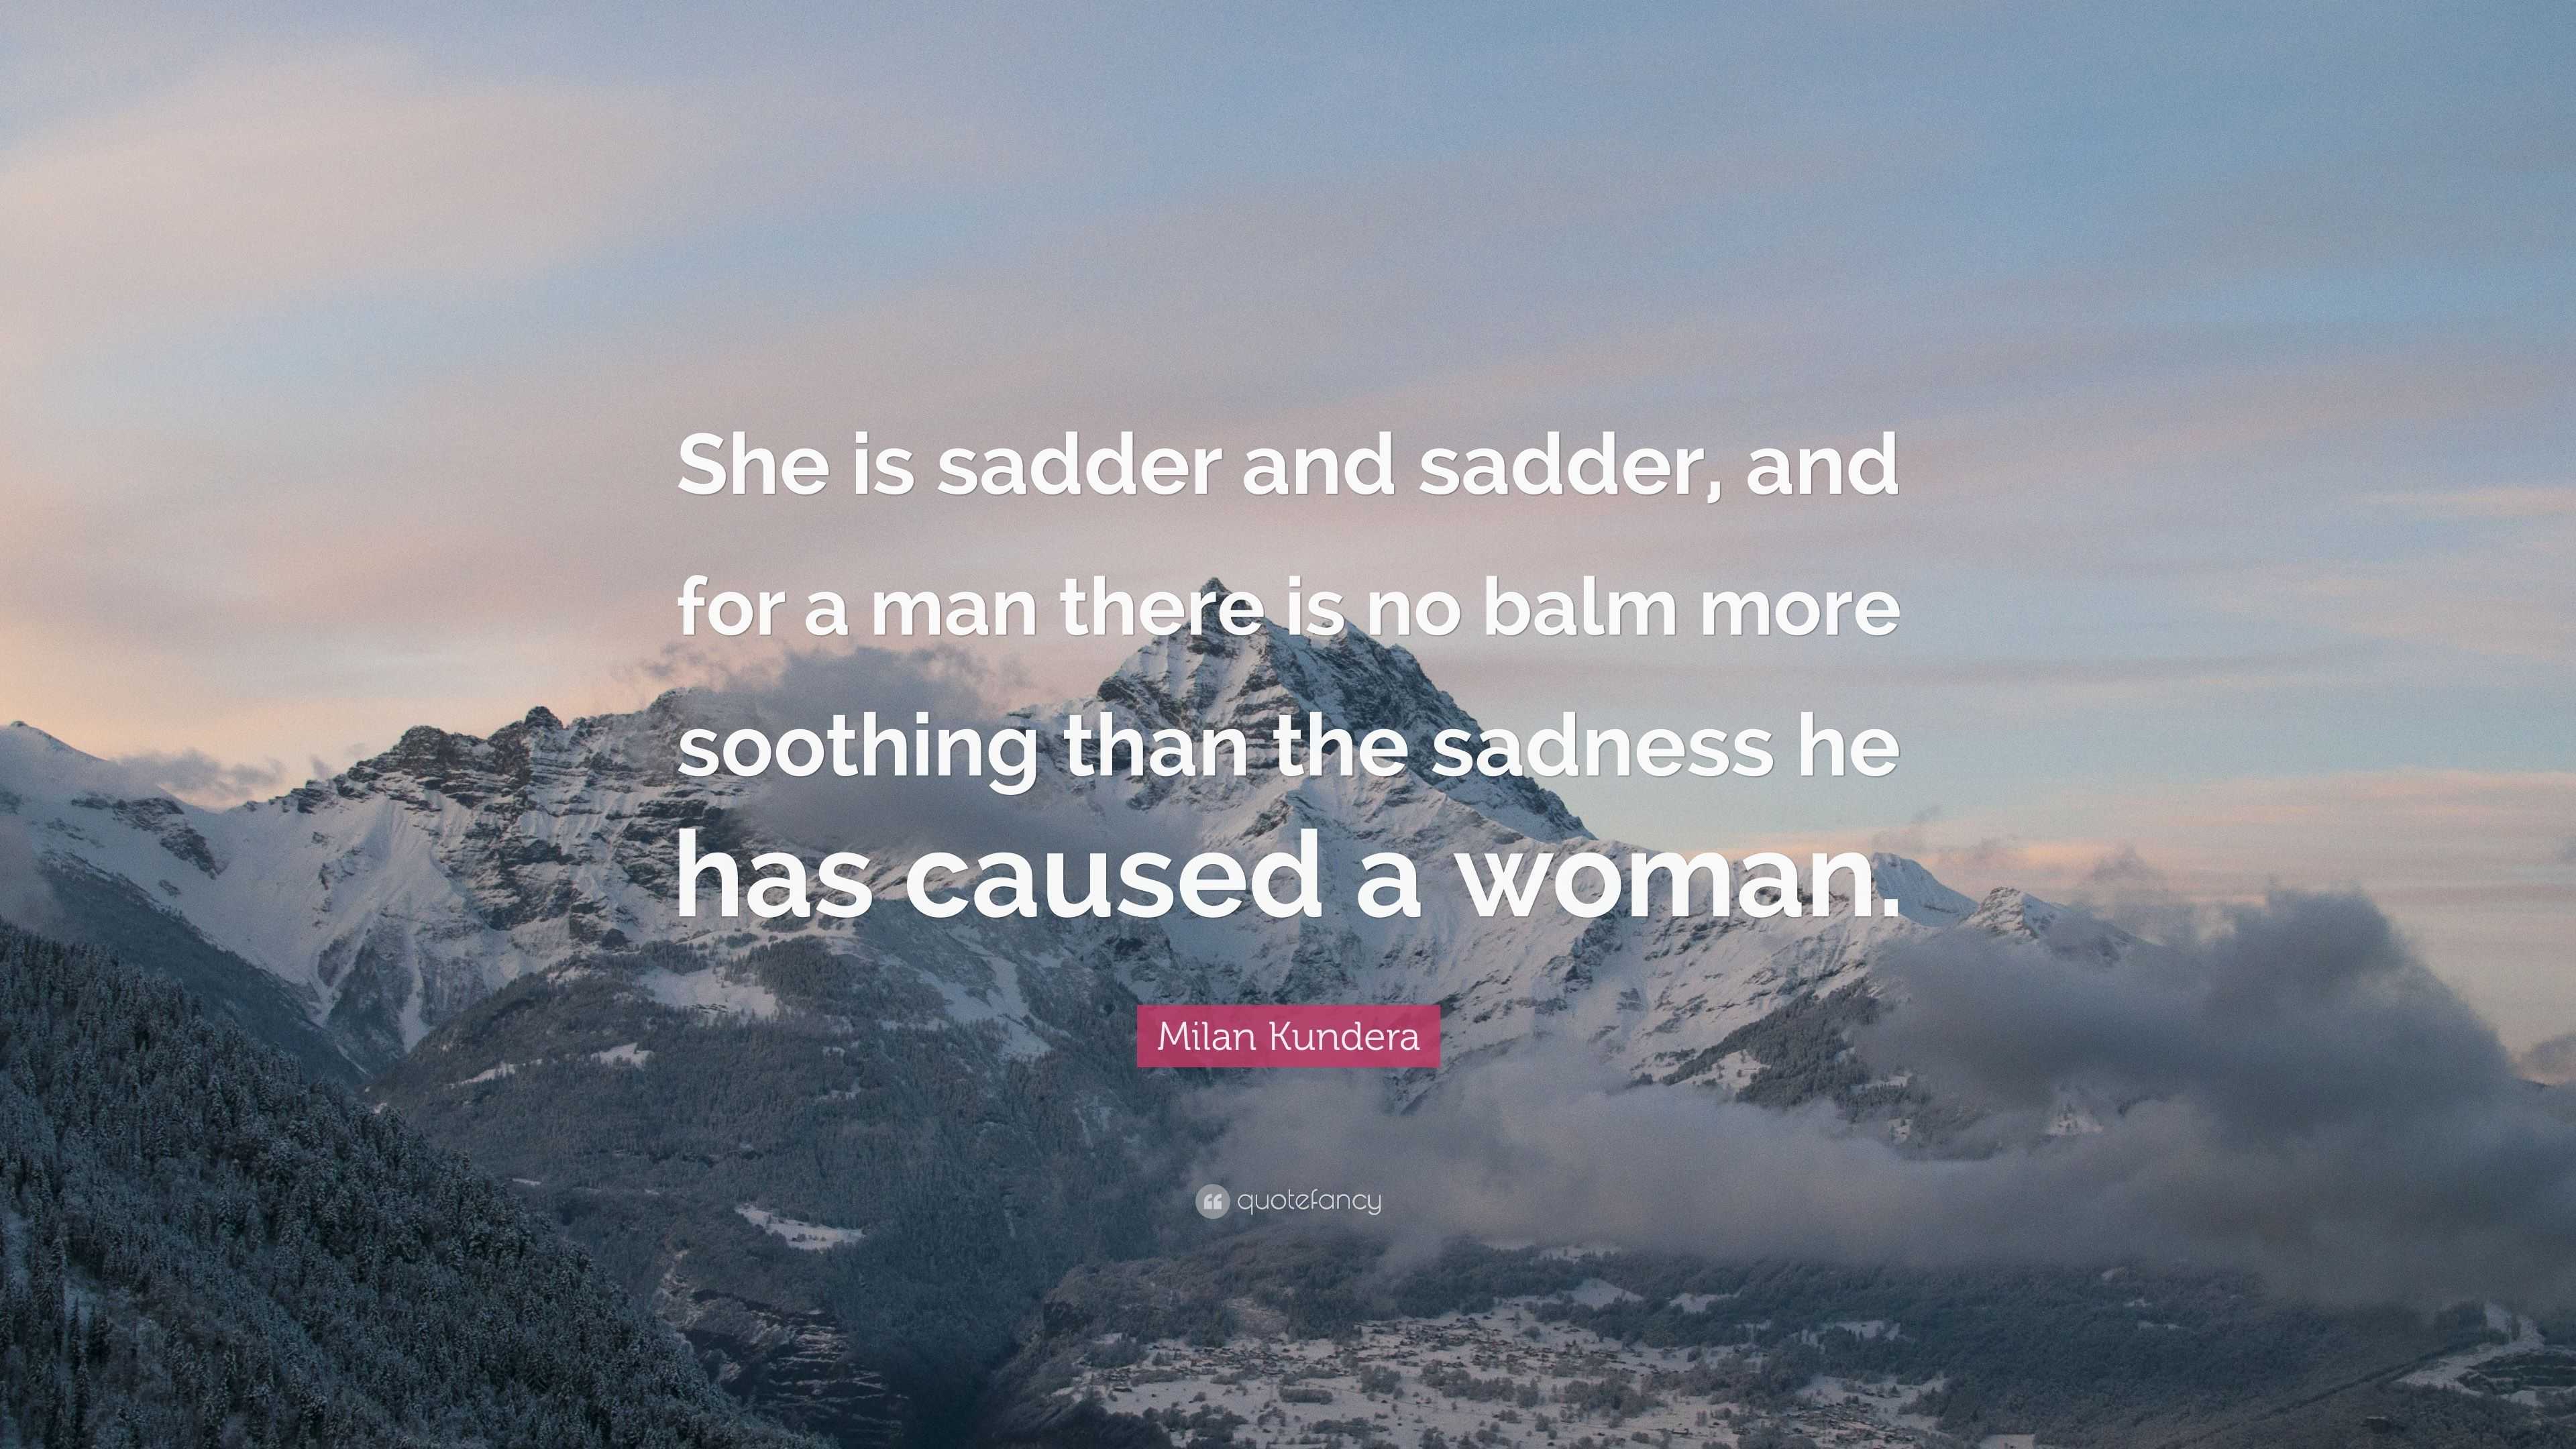 Milan Kundera Quote: “She is sadder and sadder, and for a man there is ...